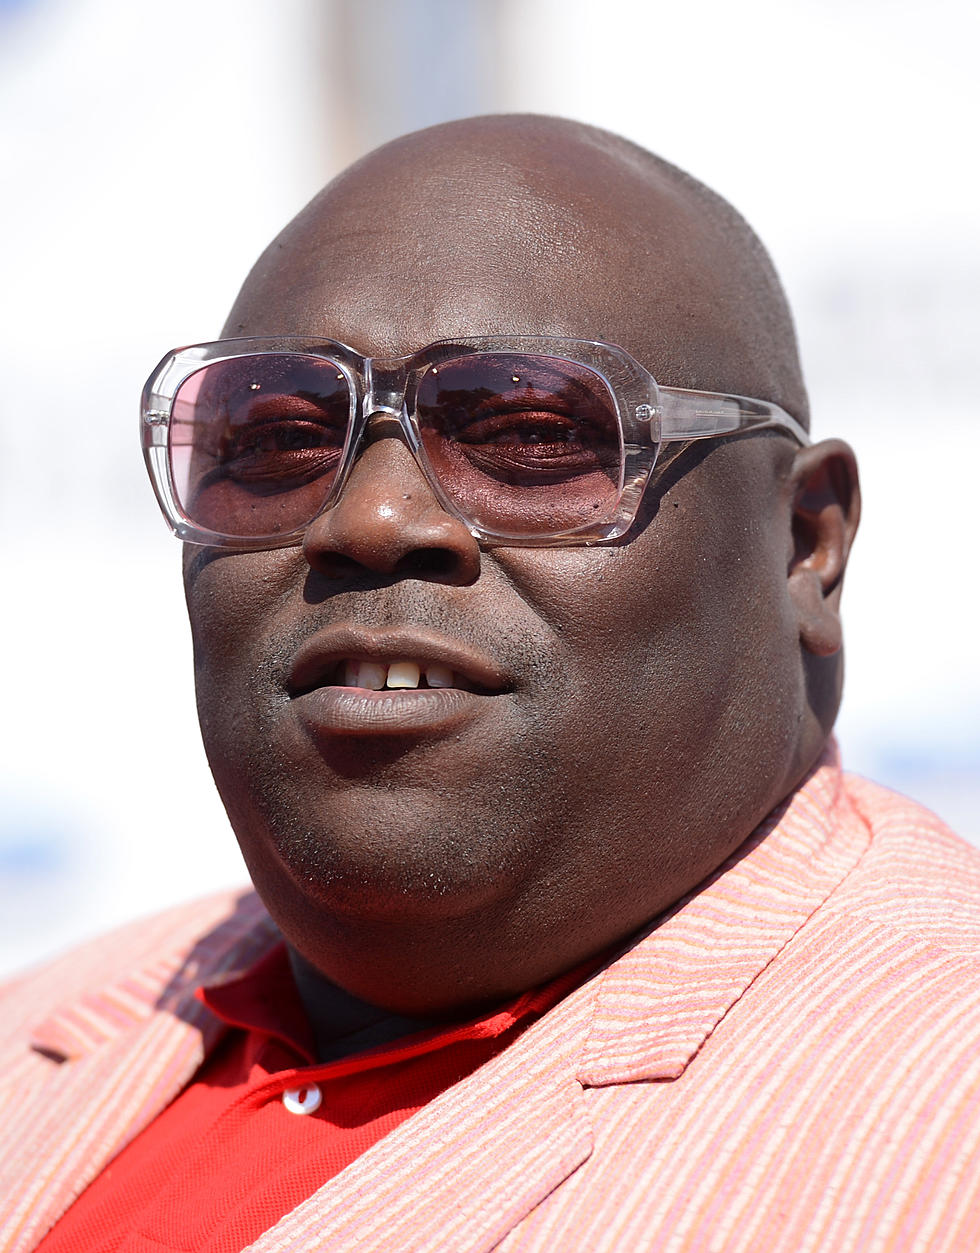 Comedian, Actor Faizon Love is coming to Killeen